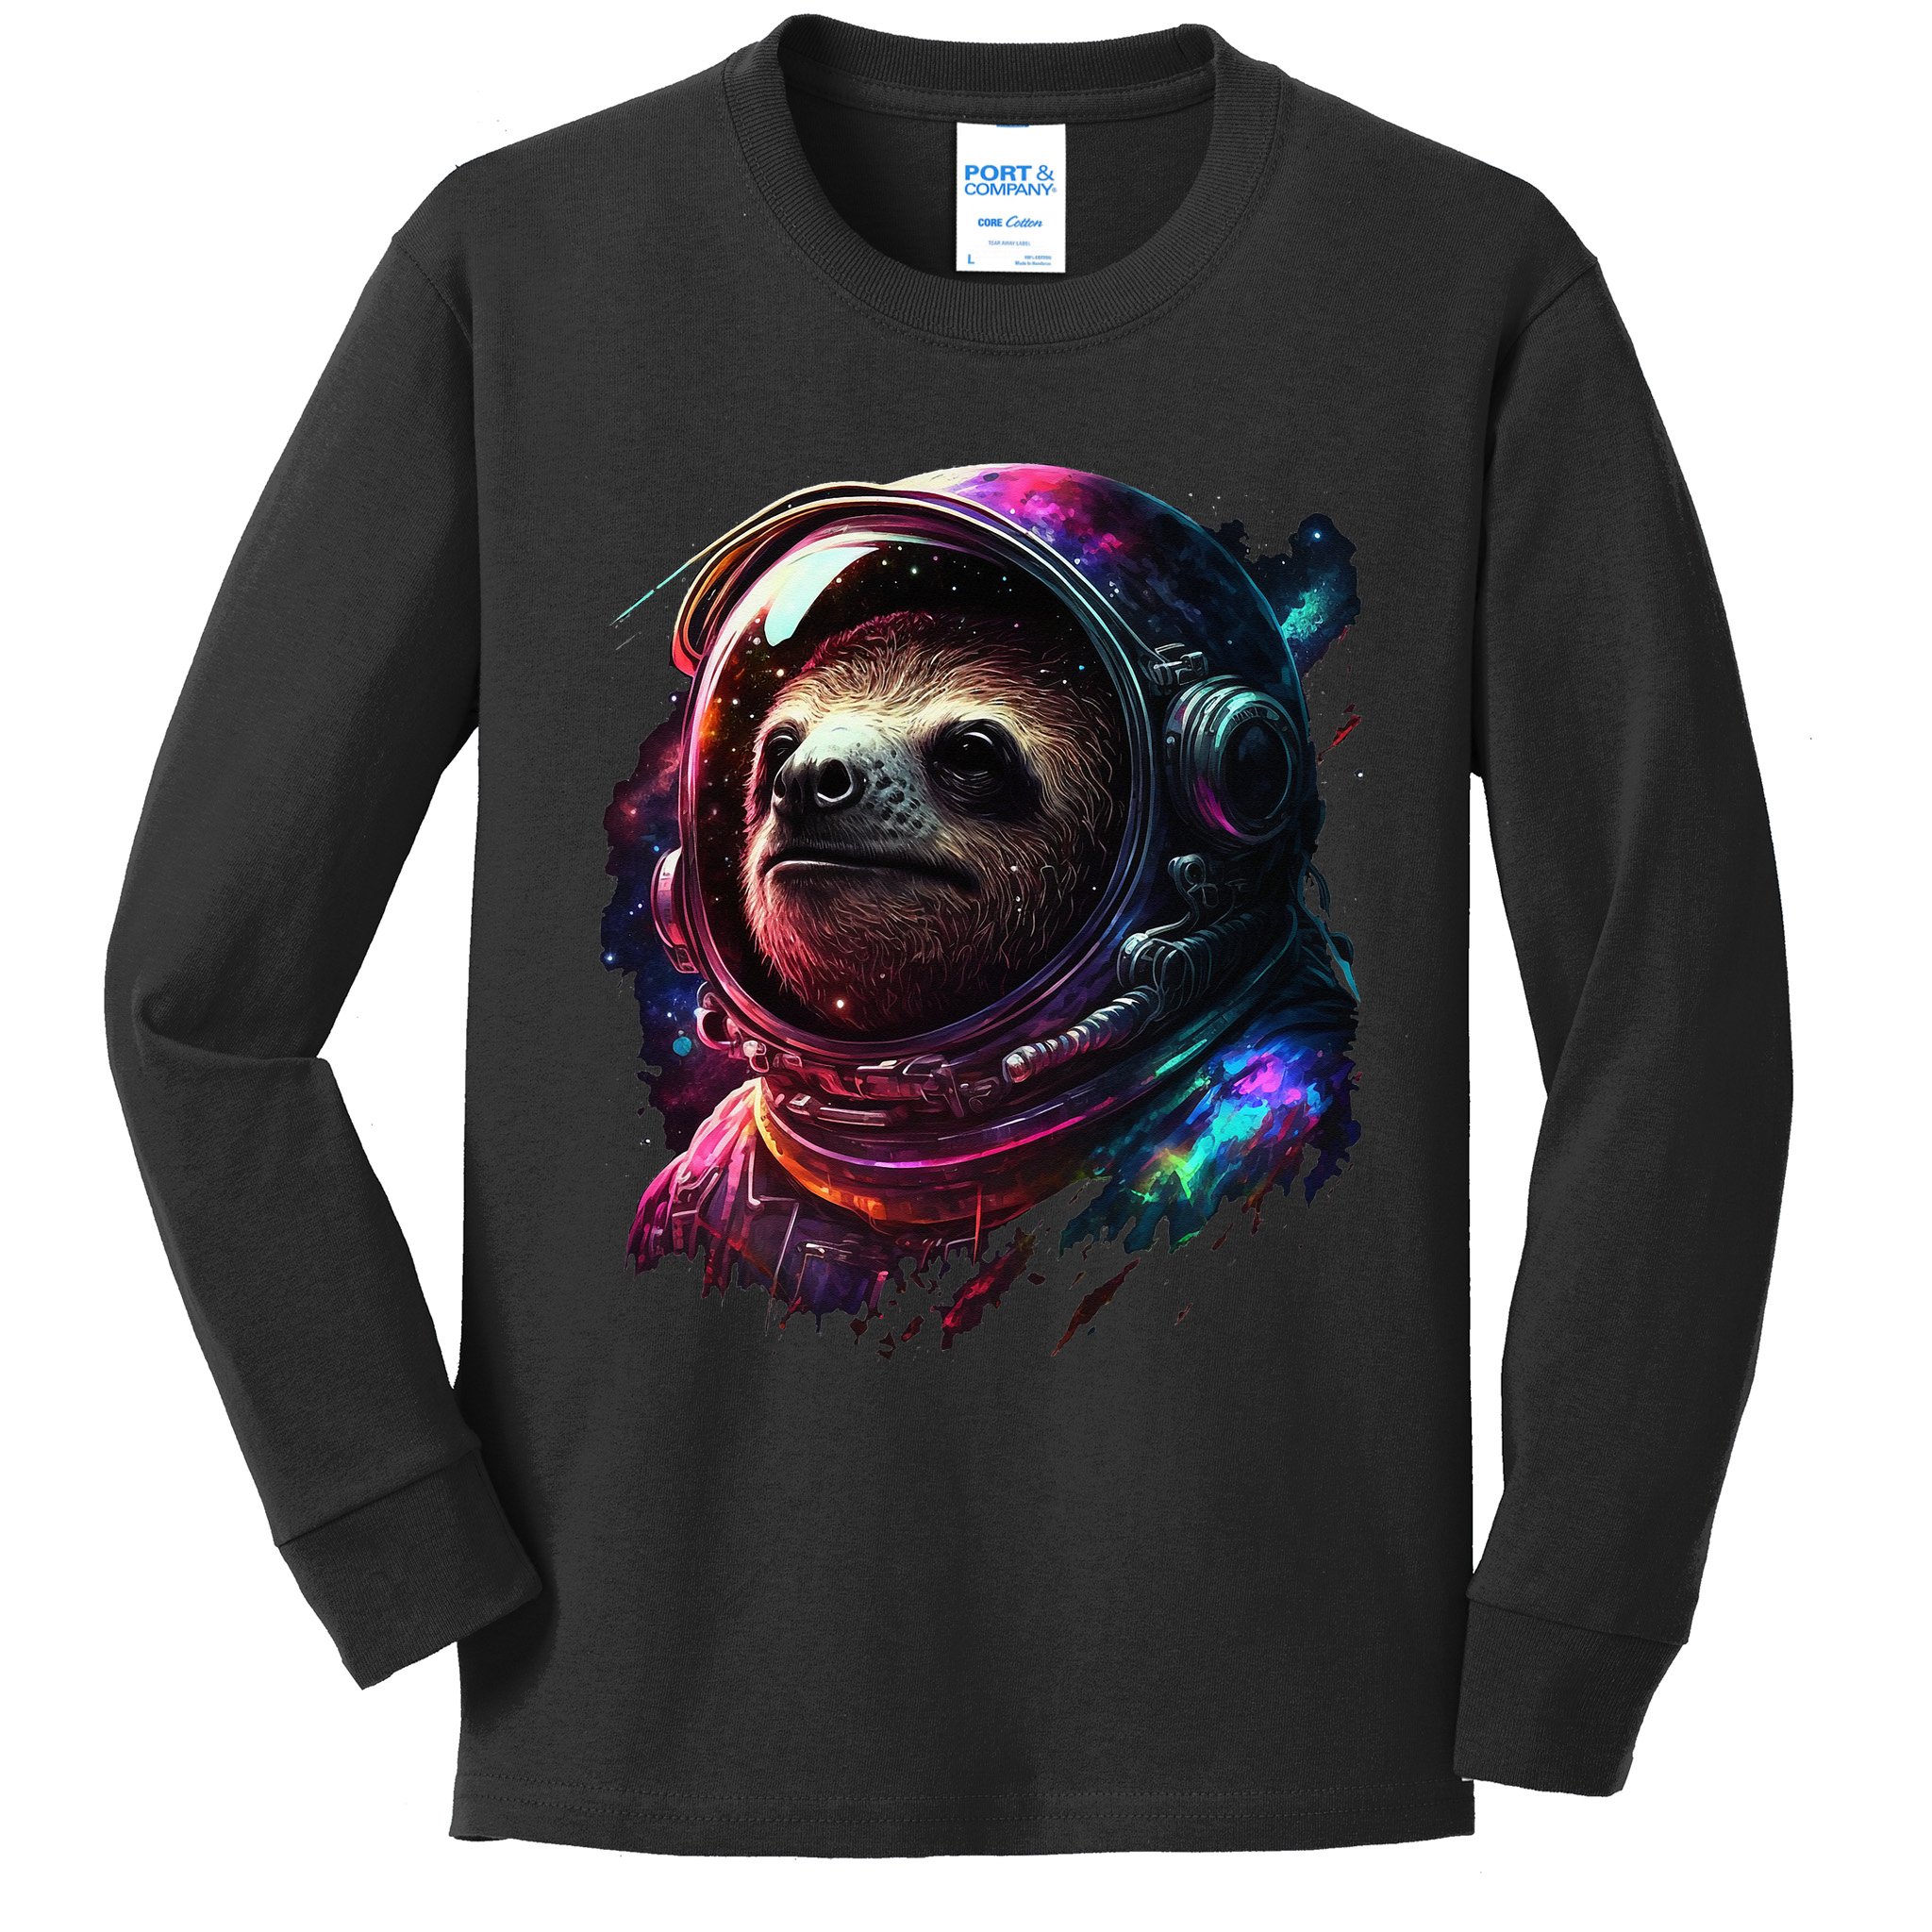 sloth wearing a space suit